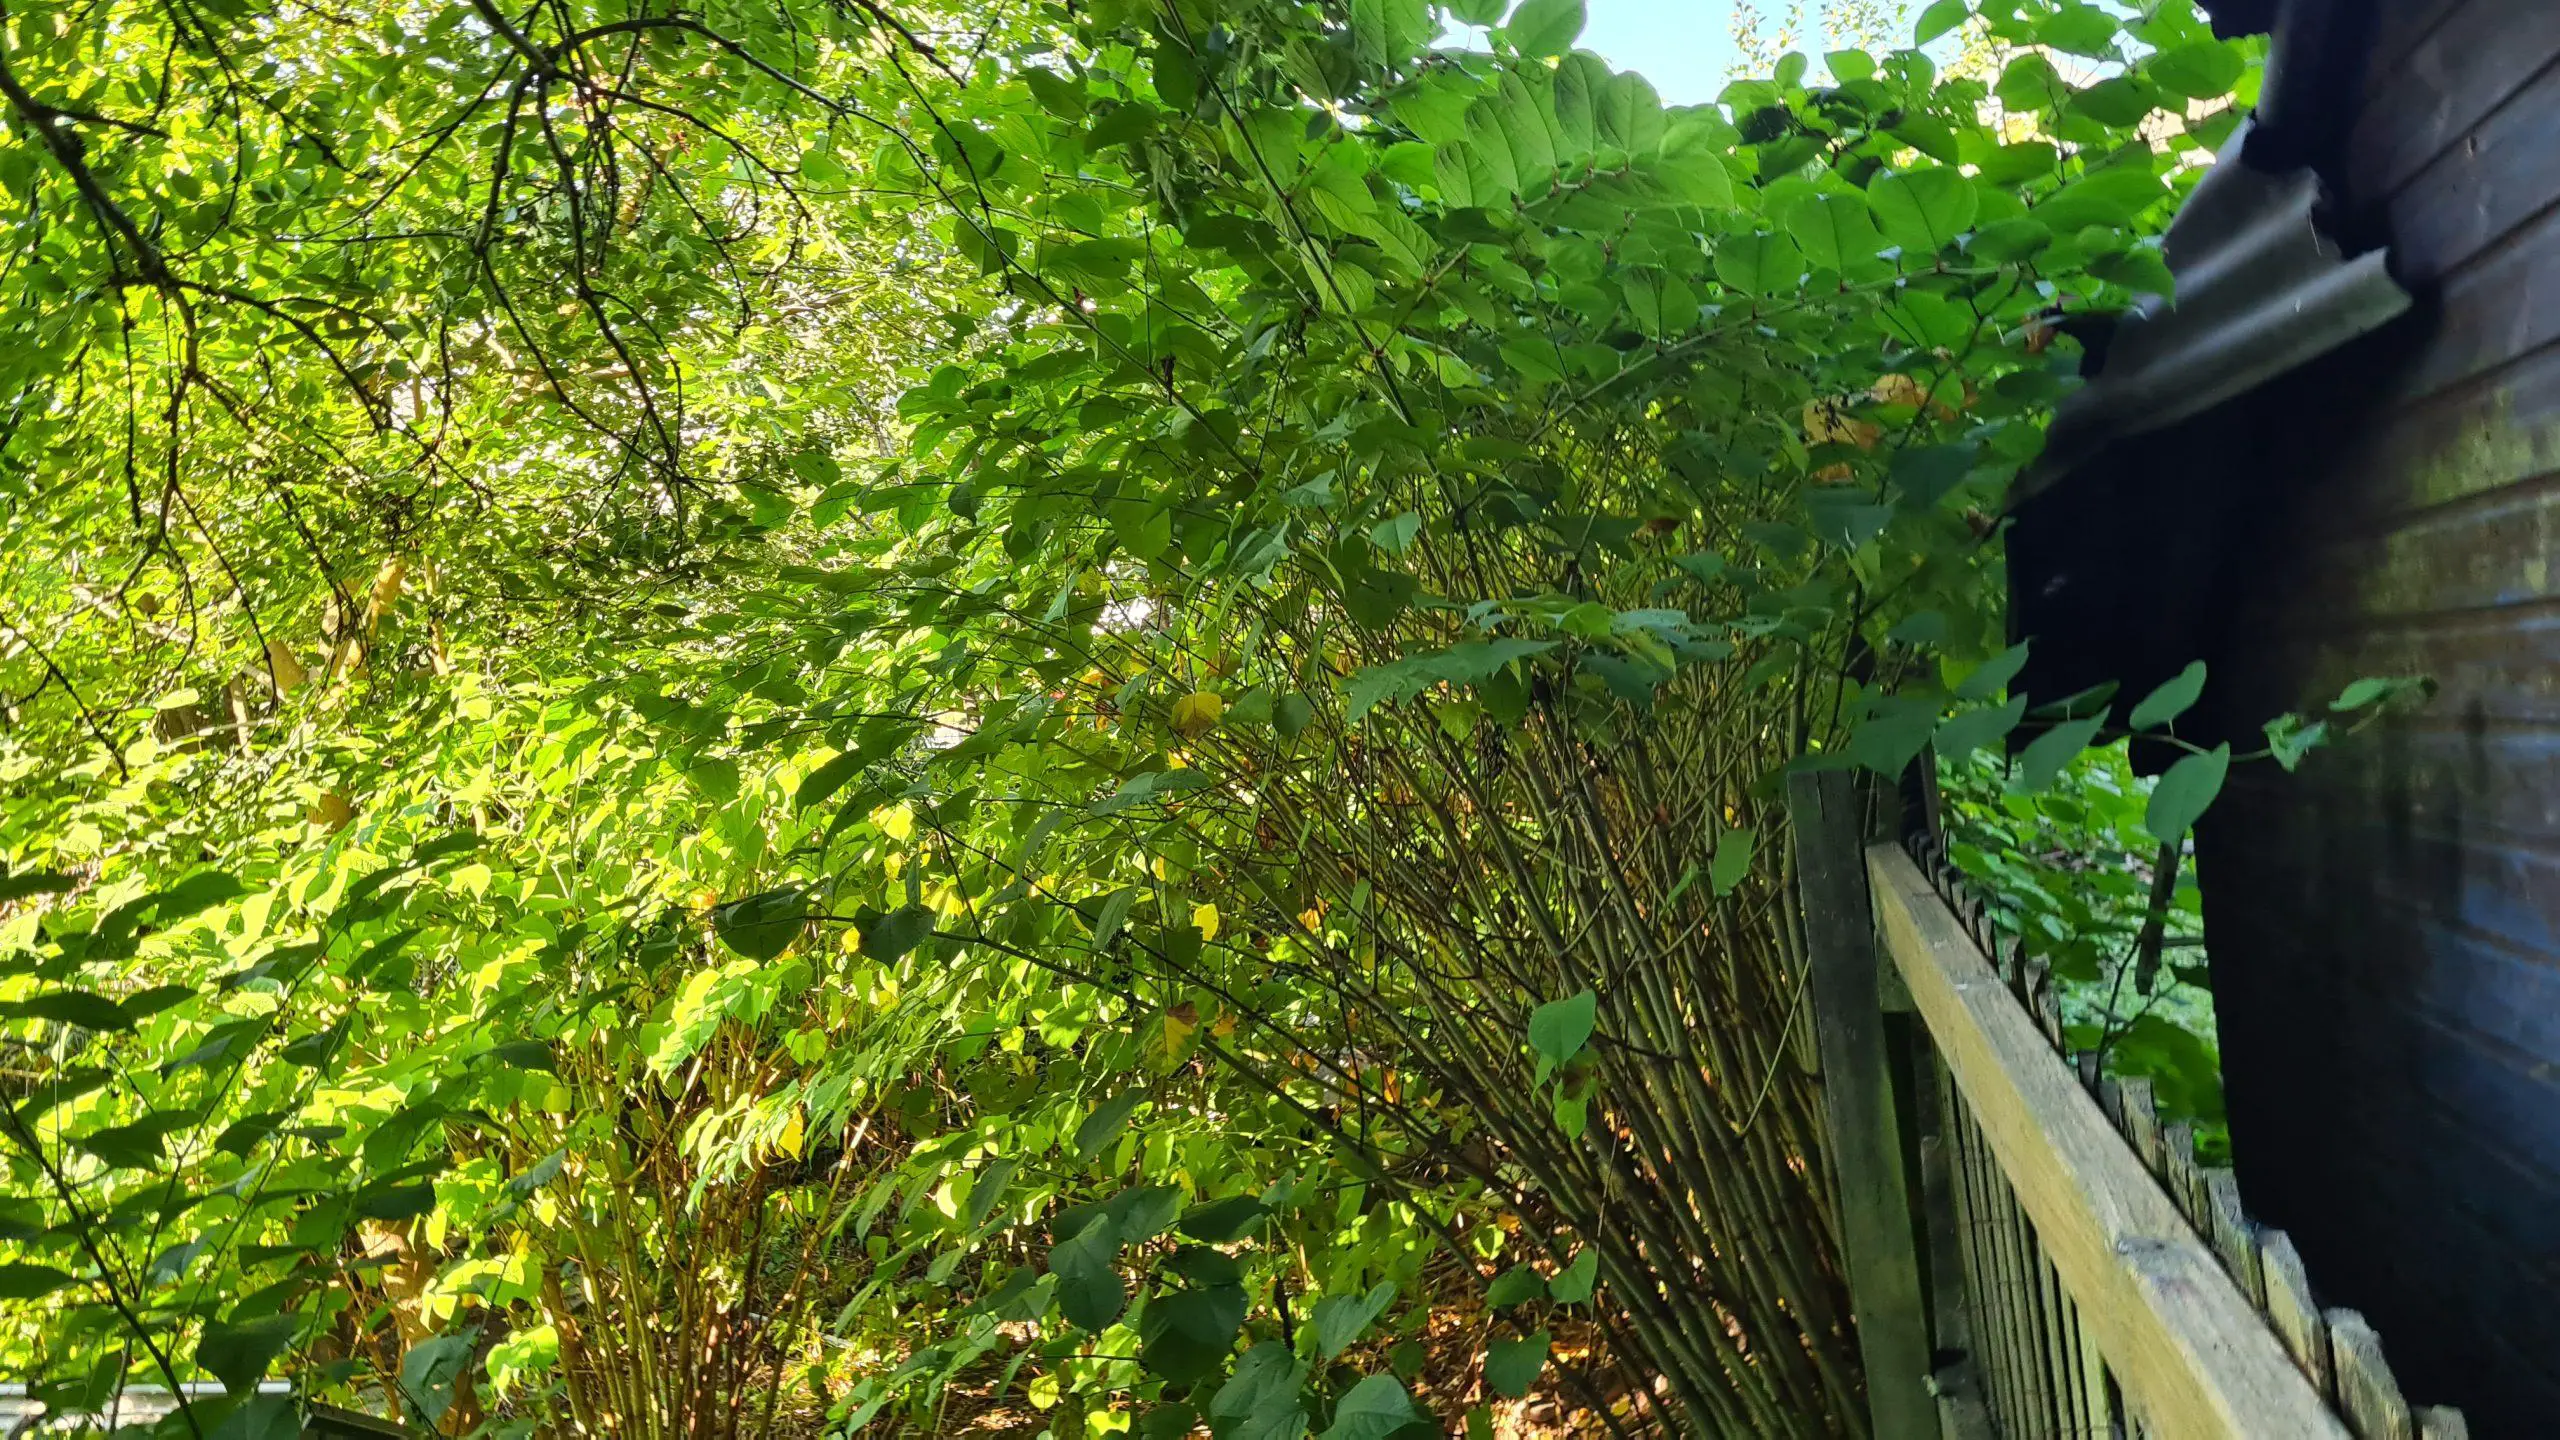 Treatment of Japanese knotweed needs to be managed methodically over a period of time for effective results